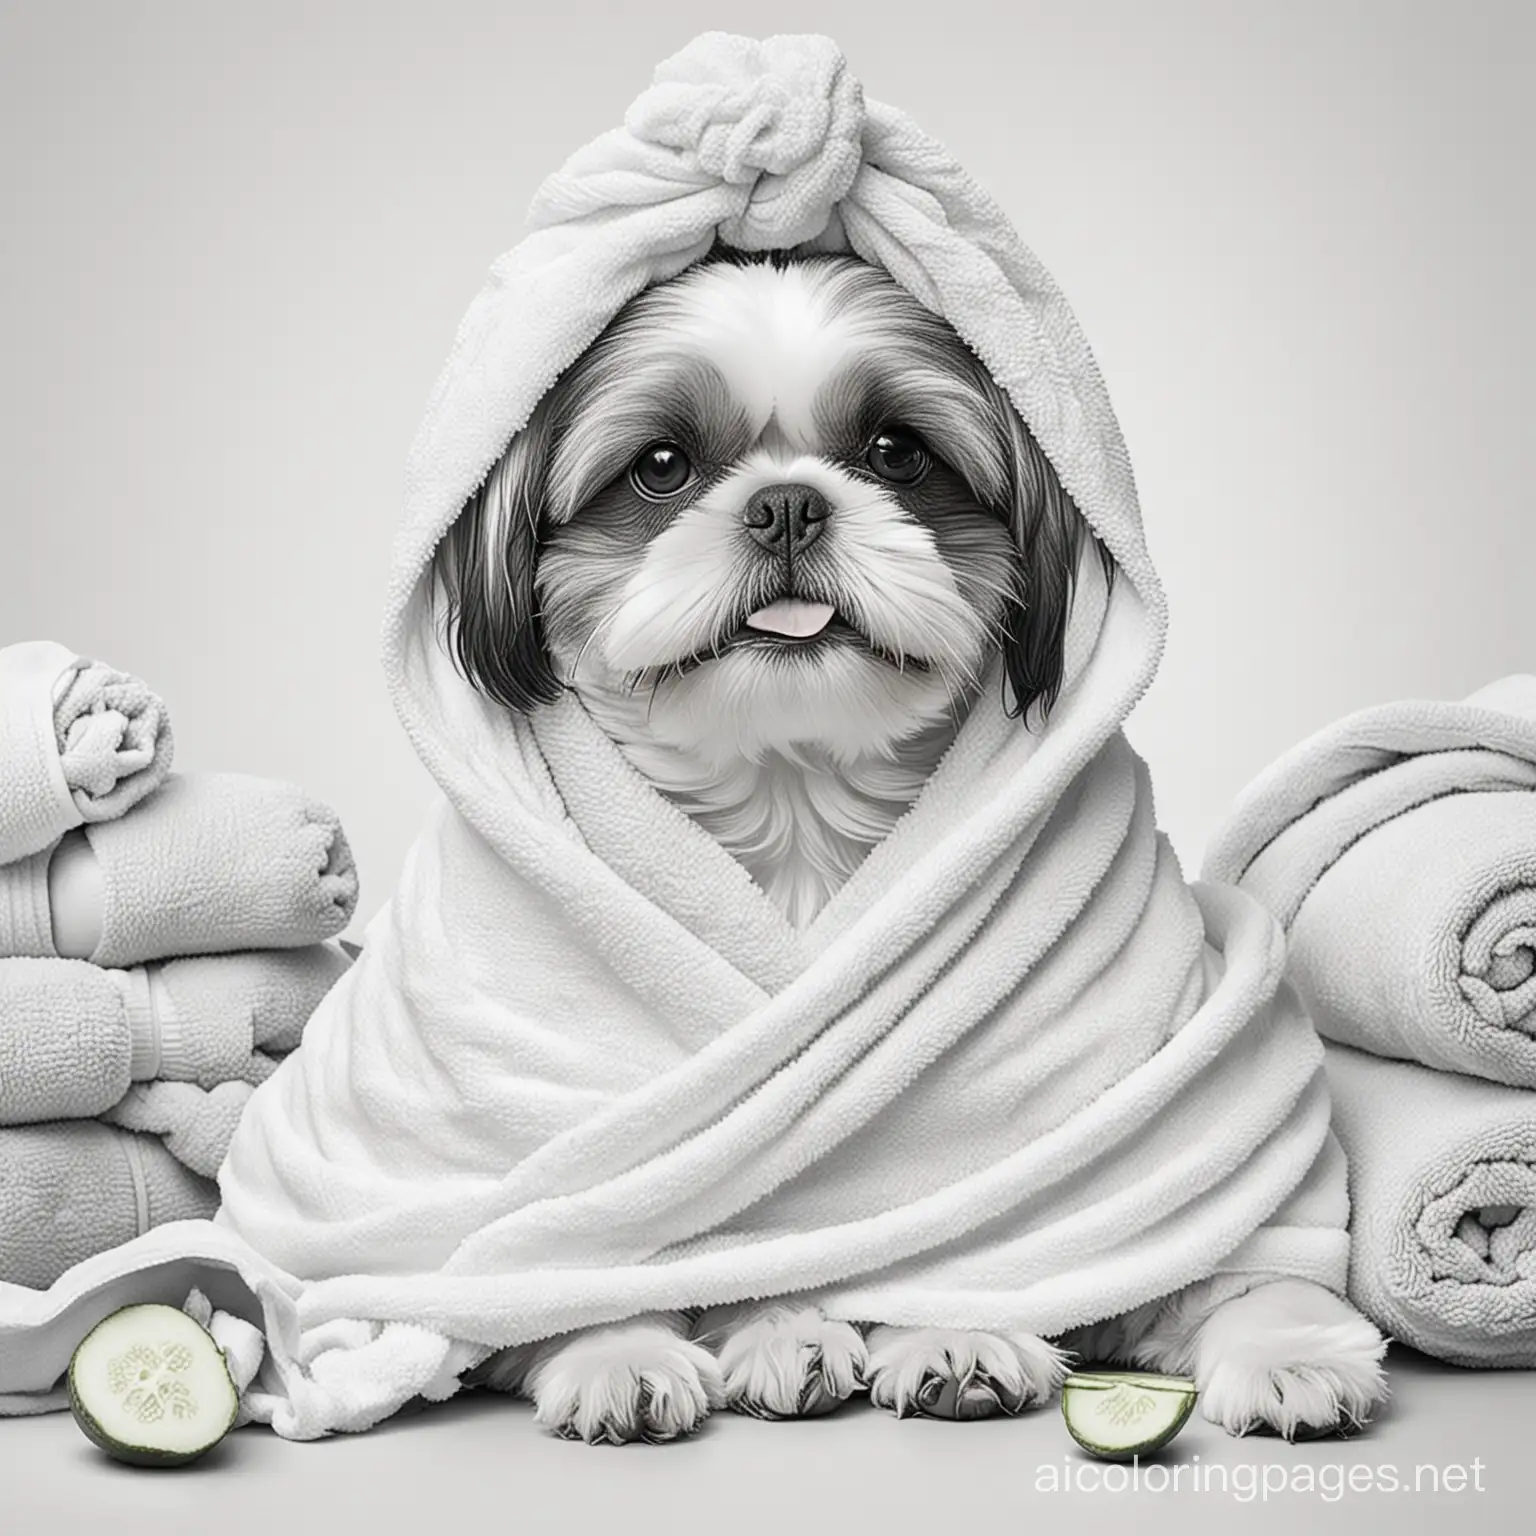 shih tzu at the spa with its head wrapped in towel with cucumbers over its eyes and tongue out , Coloring Page, black and white, line art, white background, Simplicity, Ample White Space. The background of the coloring page is plain white to make it easy for young children to color within the lines. The outlines of all the subjects are easy to distinguish, making it simple for kids to color without too much difficulty